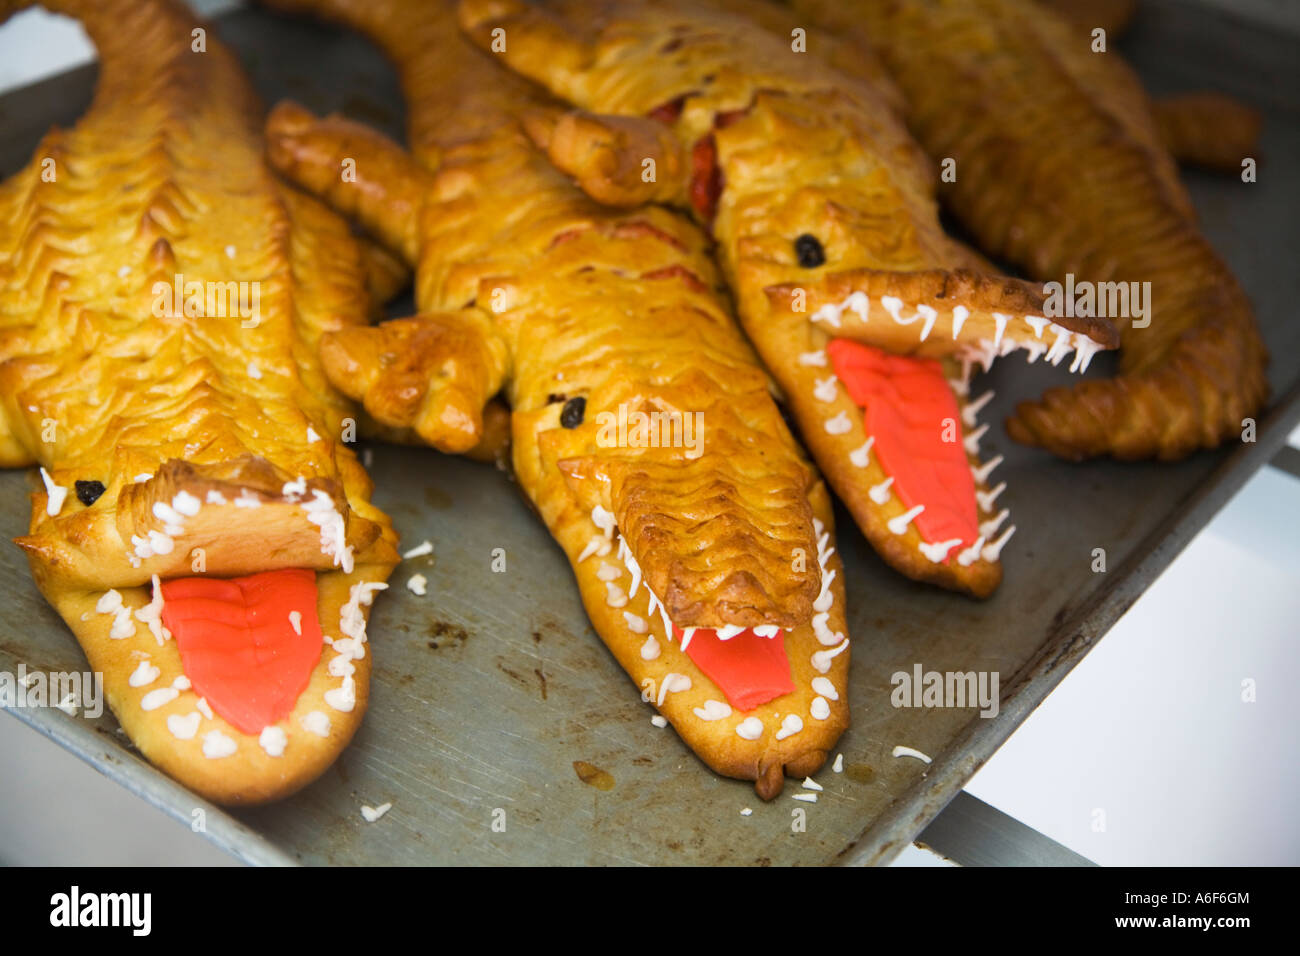 BELIZE Ambergris Caye Bakery items displayed for sale loaves of bread shaped like crocodiles pink and white frosting for teeth Stock Photo